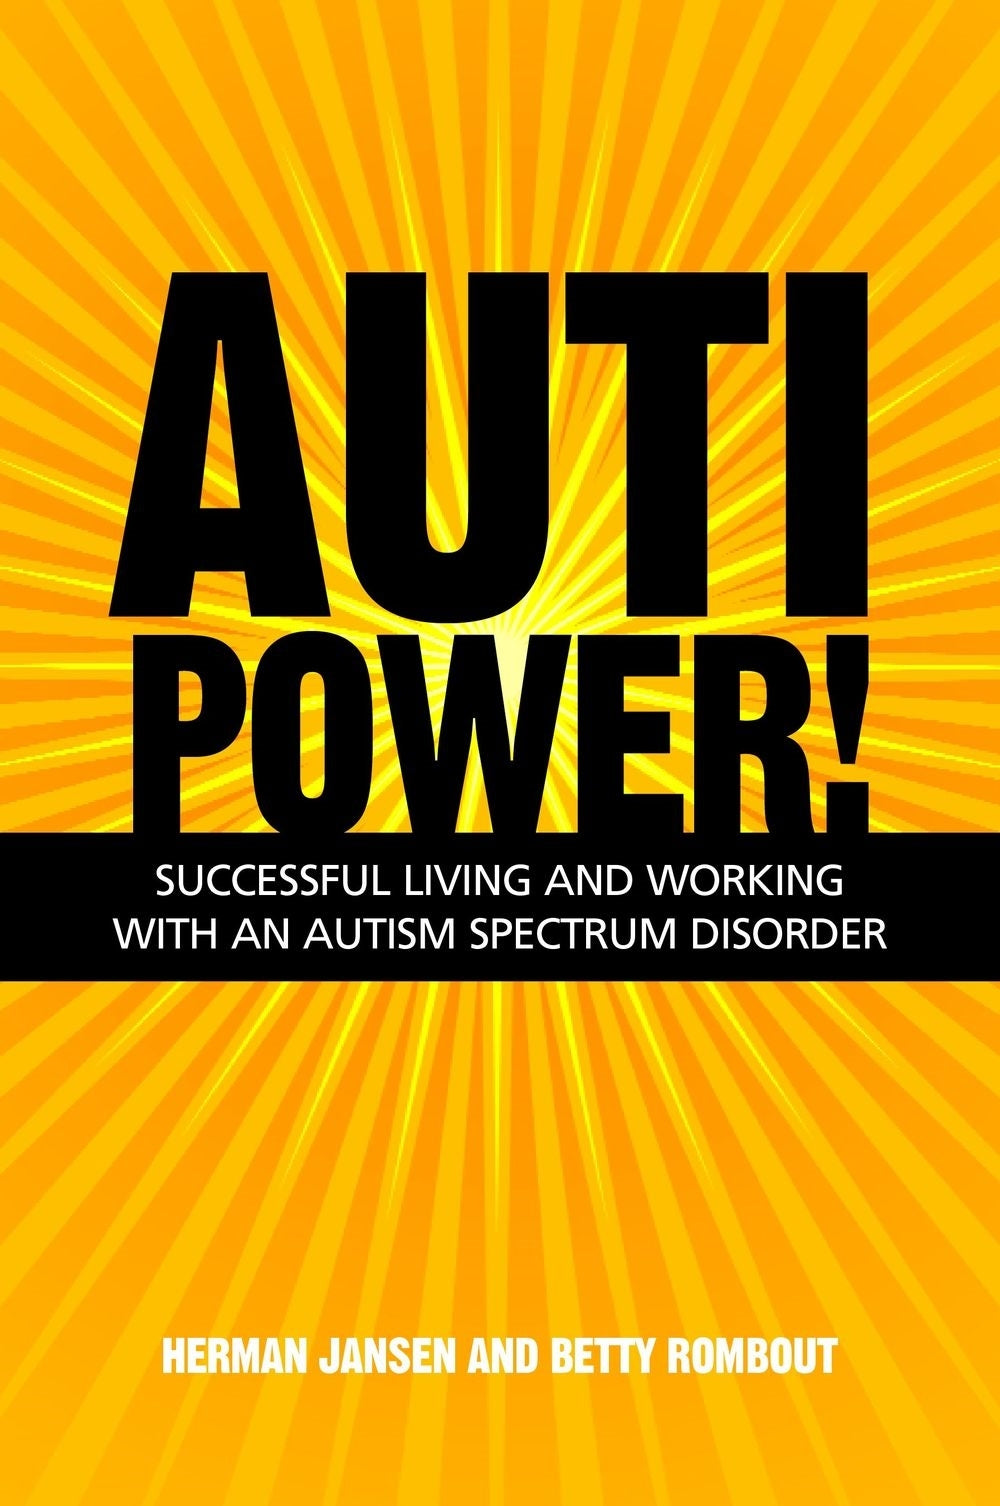 AutiPower! Successful Living and Working with an Autism Spectrum Disorder by Herman Jansen, Betty Rombout